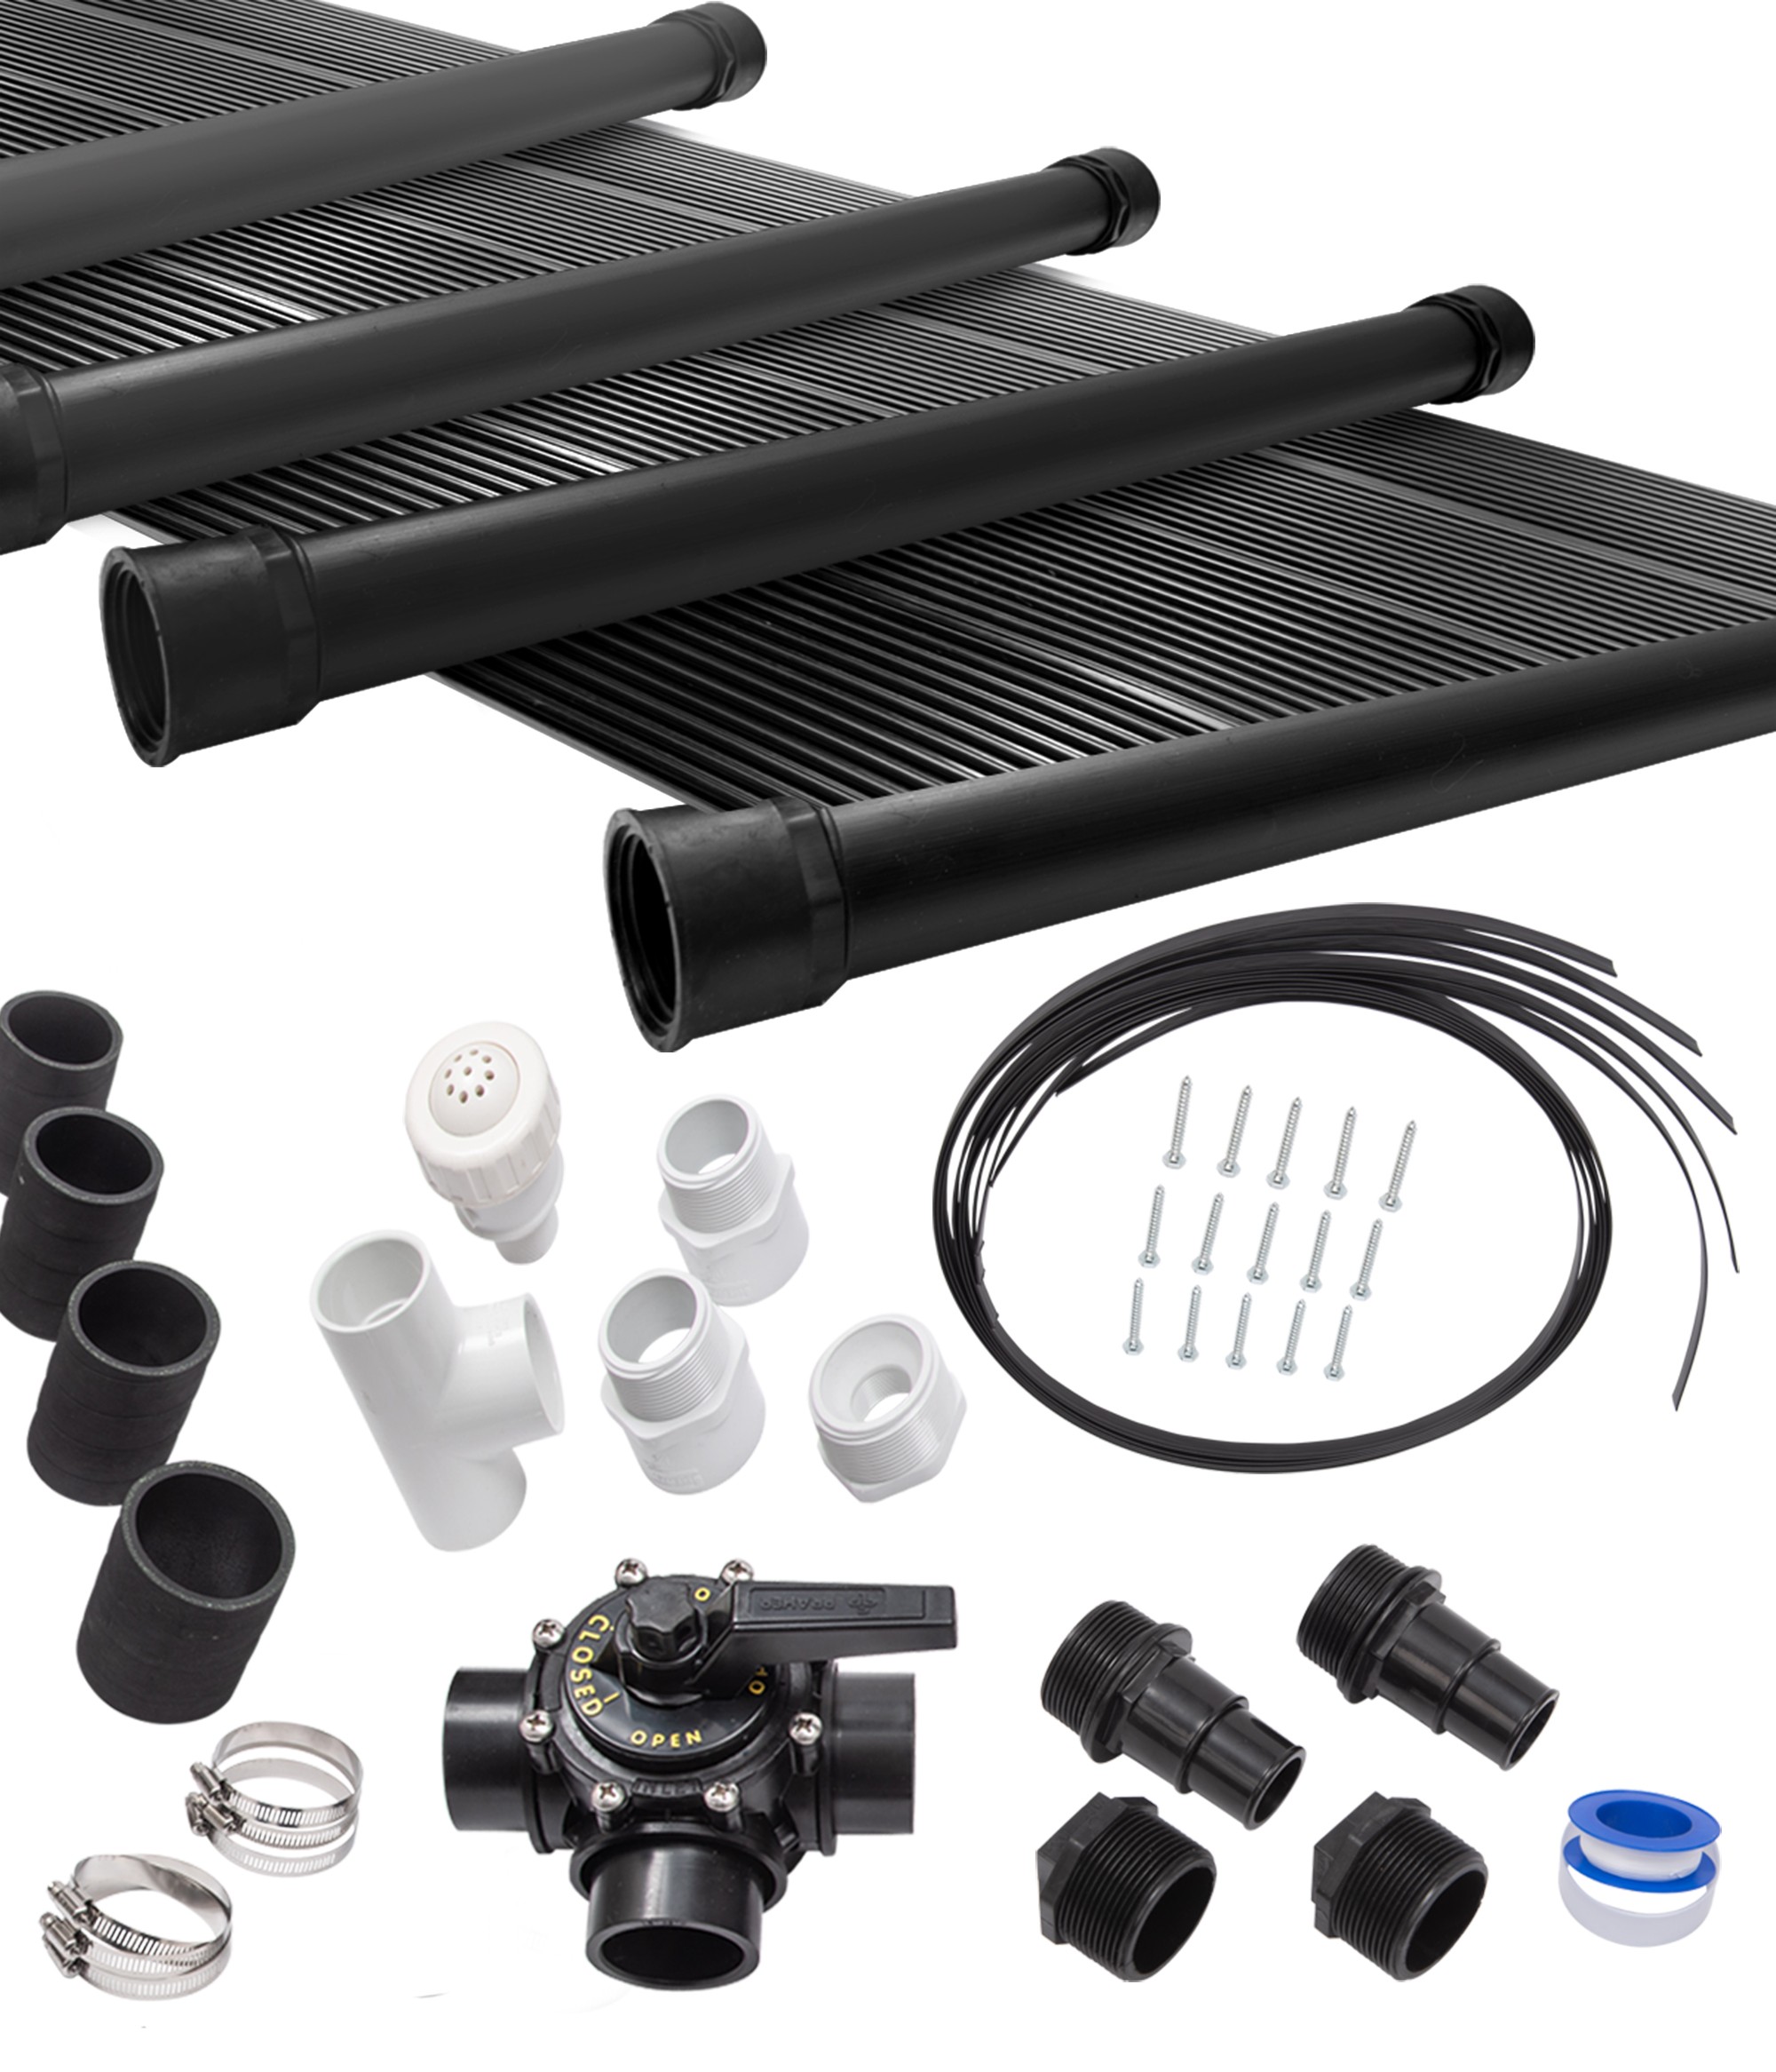 14-2X10' SunQuest Solar Swimming Pool Heater Complete System with Roof Kits